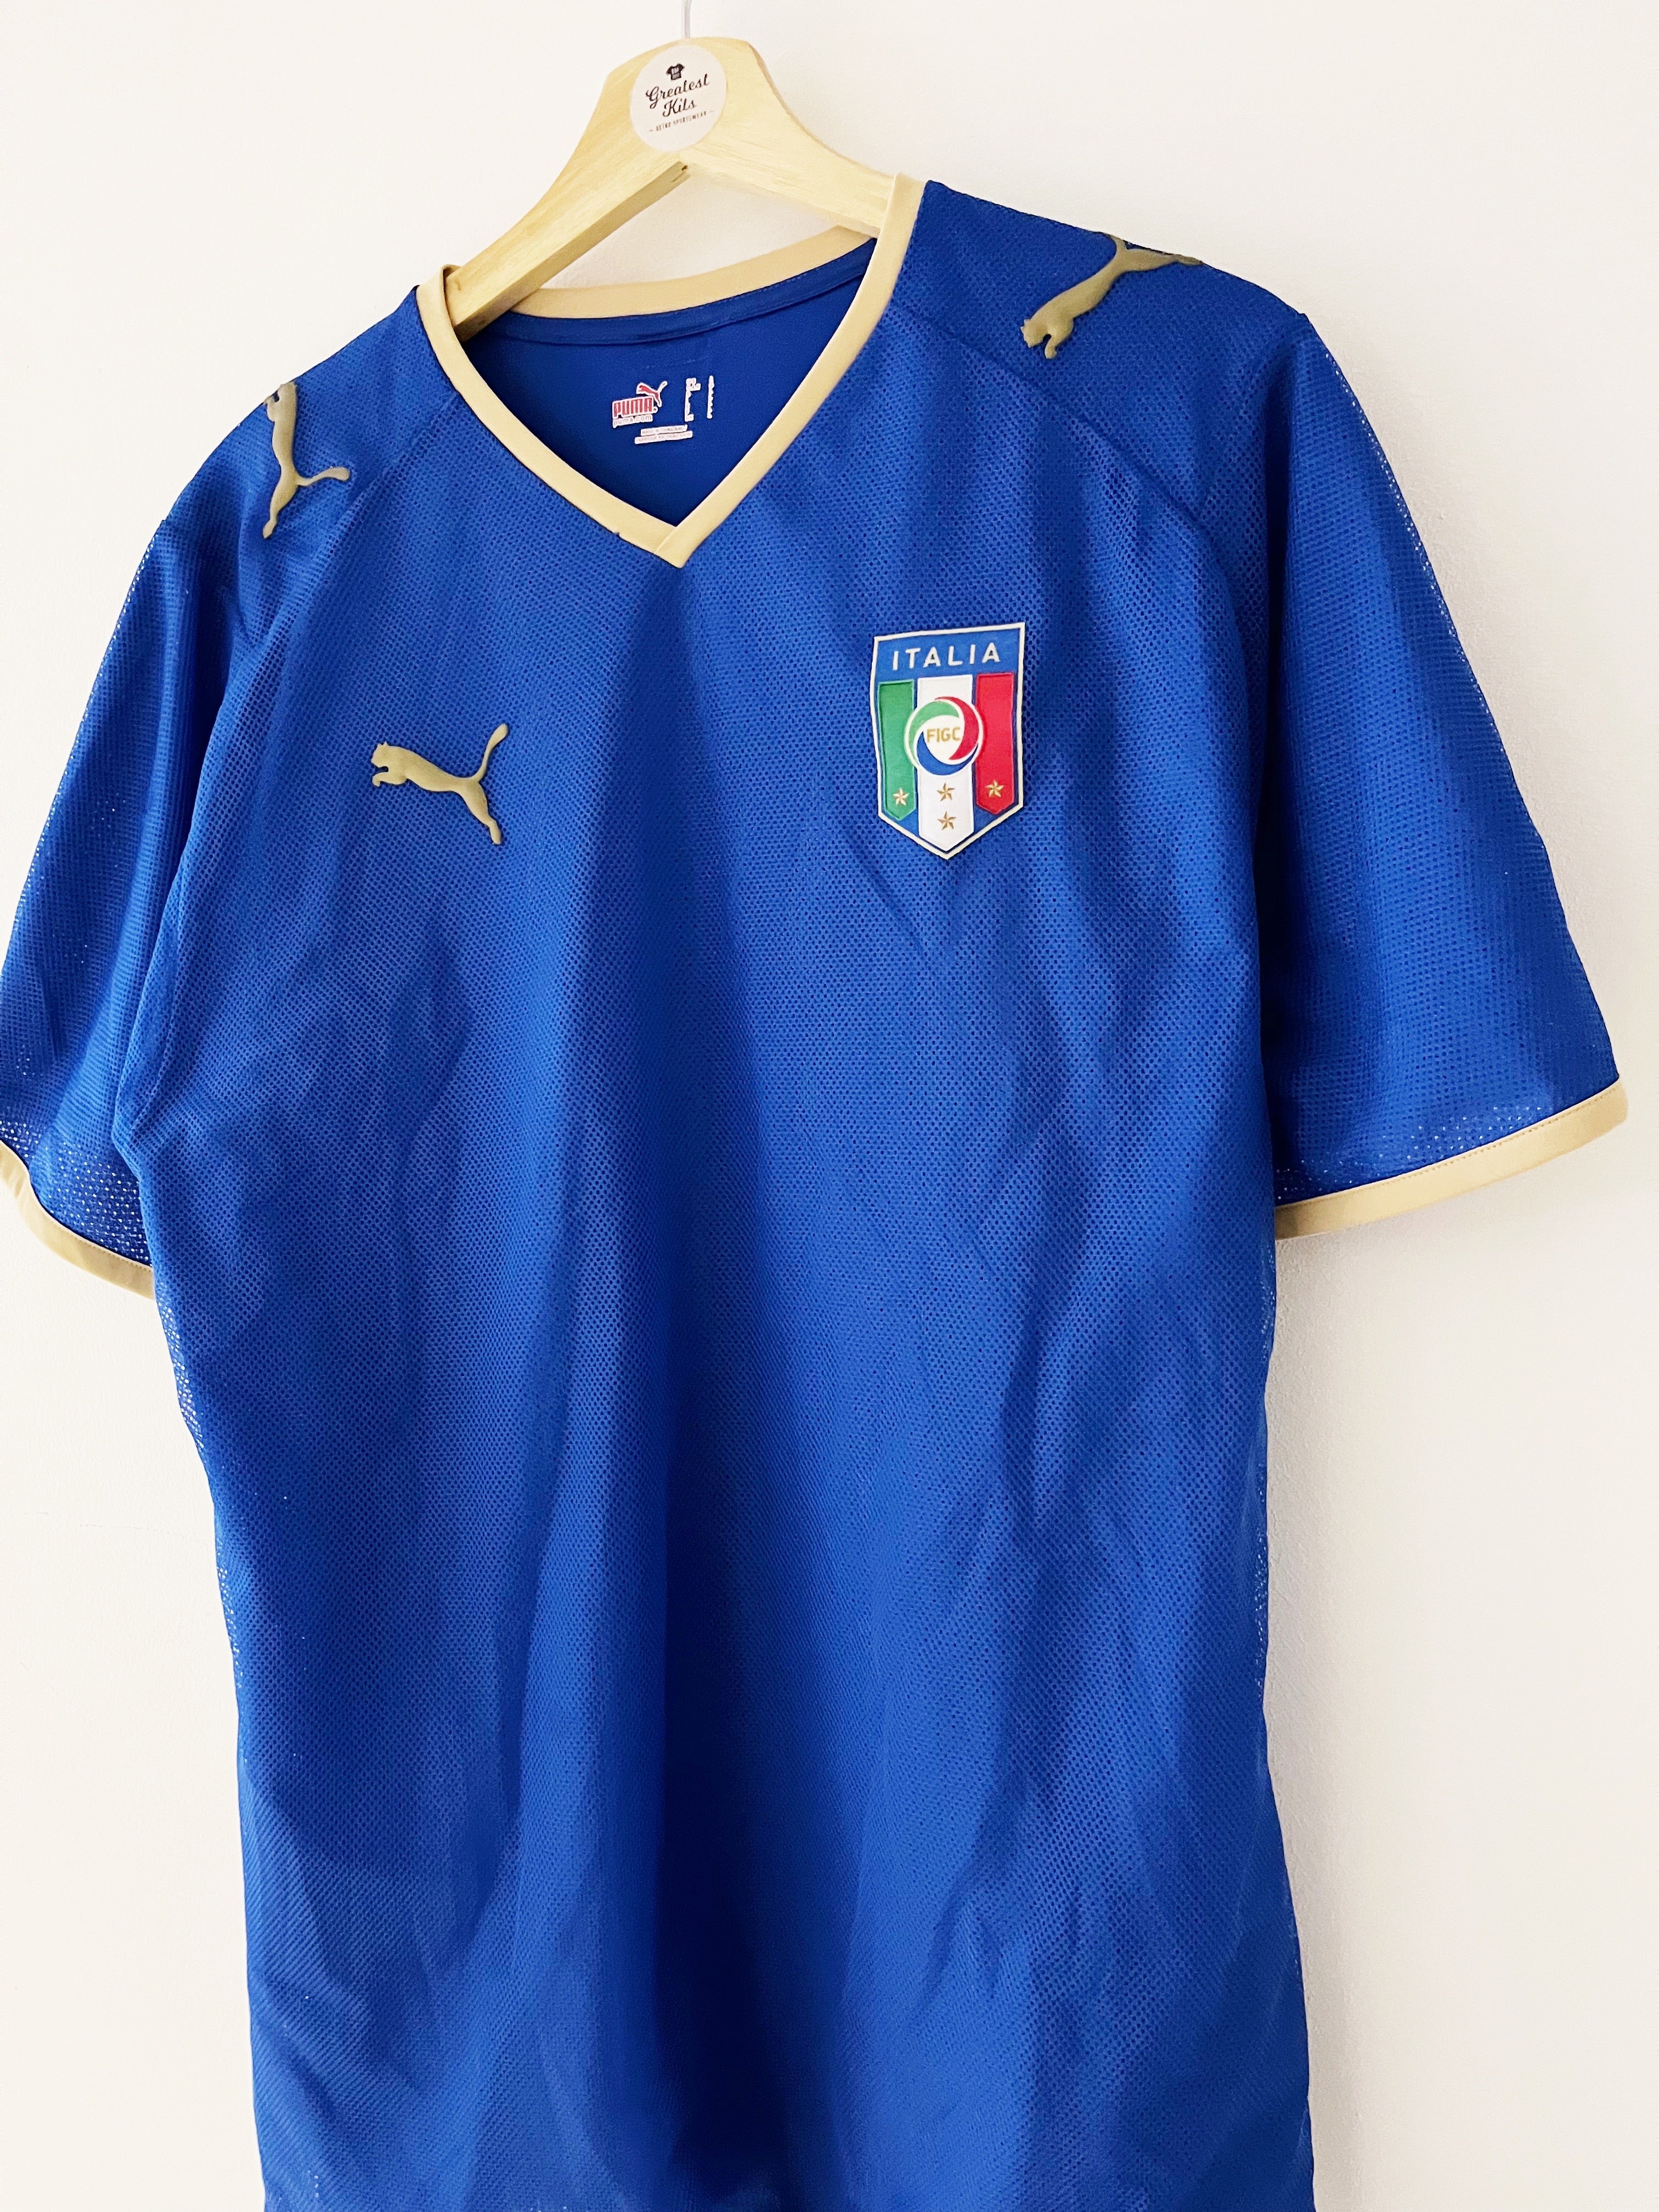 2007/08 Italy Home Shirt (L) 9/10